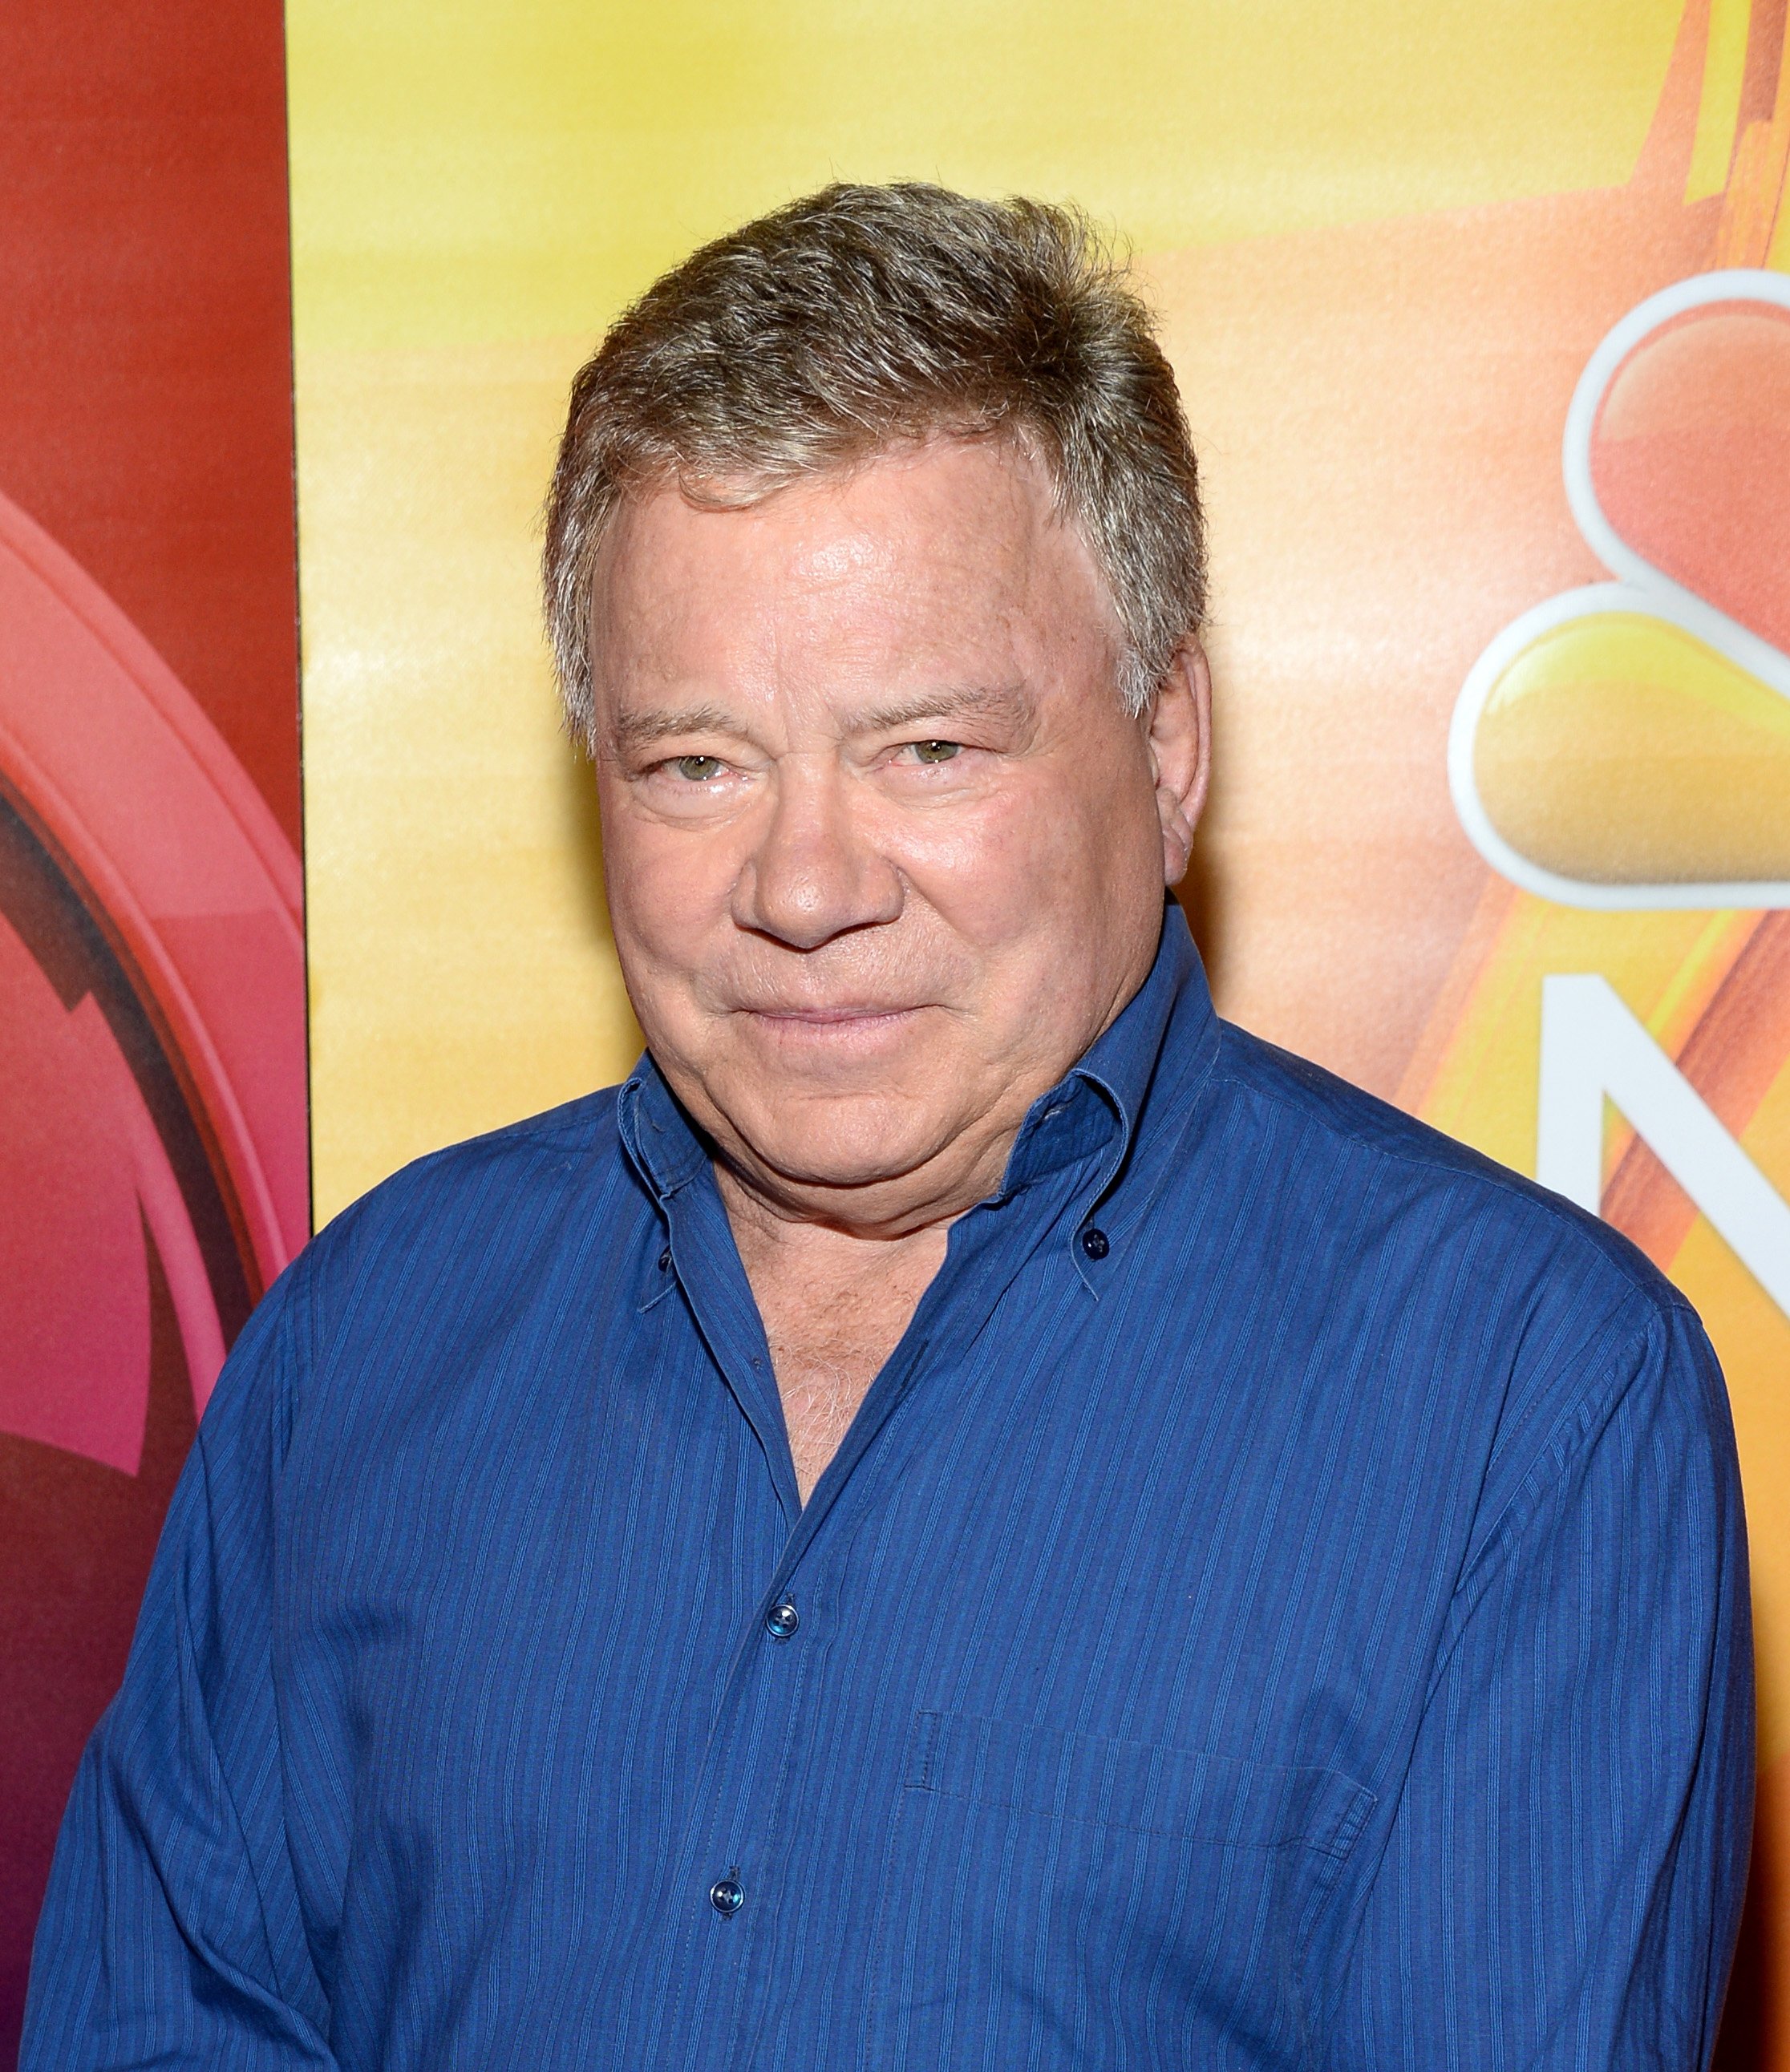 Actor William Shatner attends the NBCUniversal press day during the 2016 Summer TCA Tour at The Beverly Hilton Hotel on August 2, 2016, in Beverly Hills, California. | Source: Getty Images